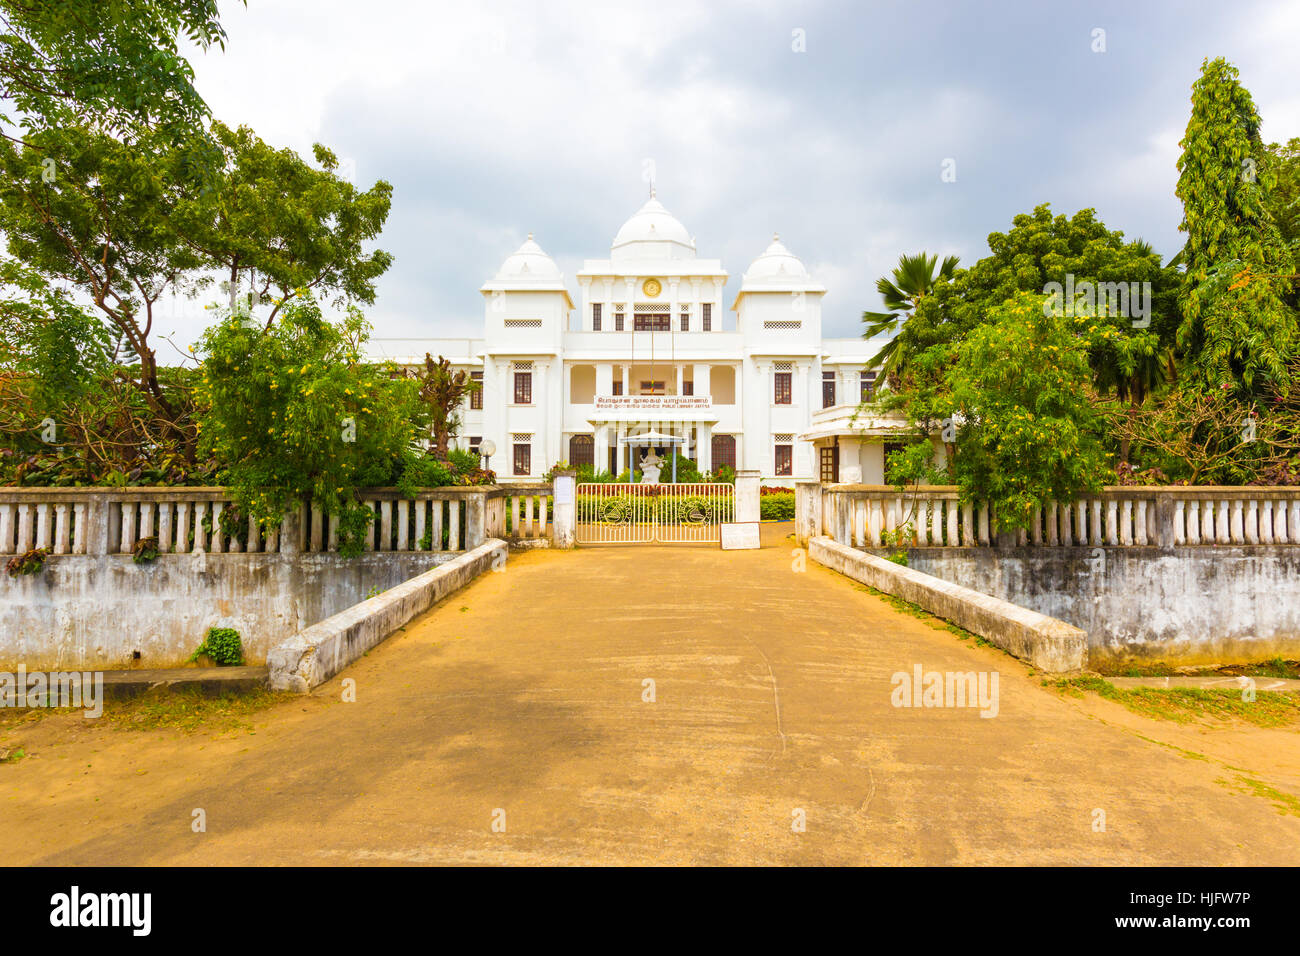 Driveway entrance to the Jaffna Public Library housed in a white British colonial building on a overcast day in Sri Lanka Stock Photo